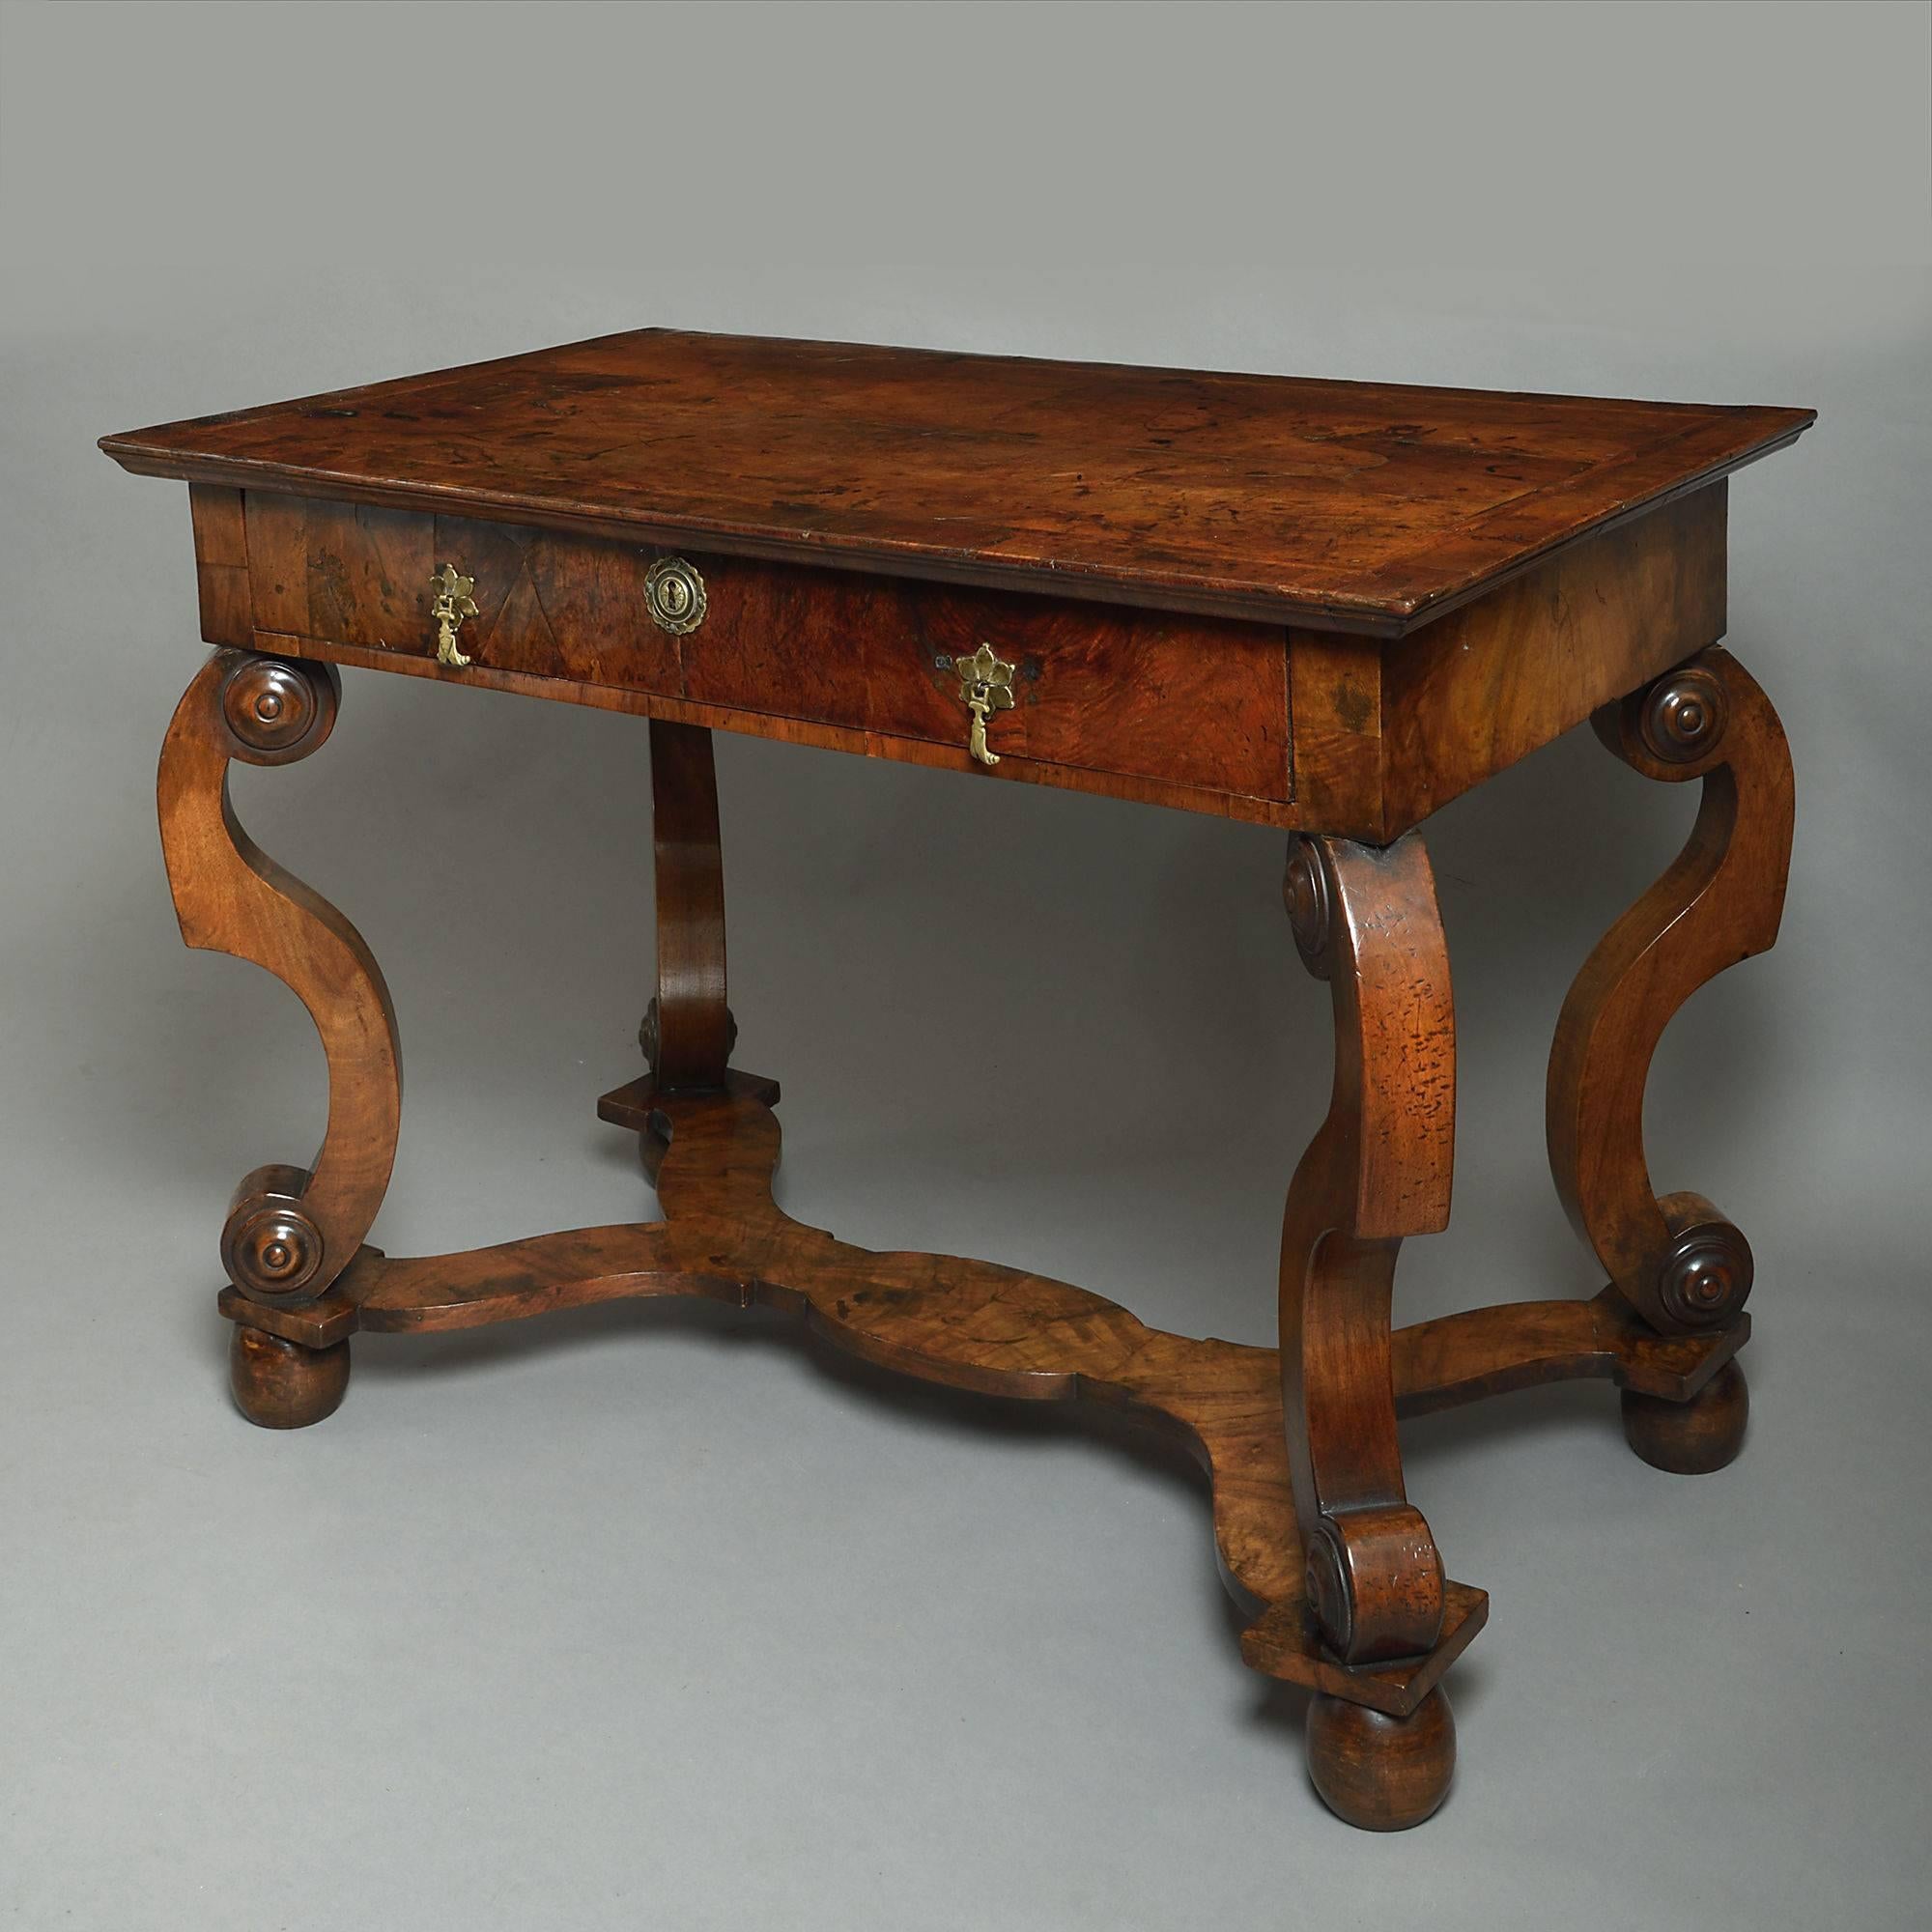 A Charles II period burr walnut side table, the quarter veneered top with herringbone inlay and crossbanding above a single drawer with flower petal brass lock escutcheon and drop handles, all supported upon S-scroll legs, conjoined by a shaped